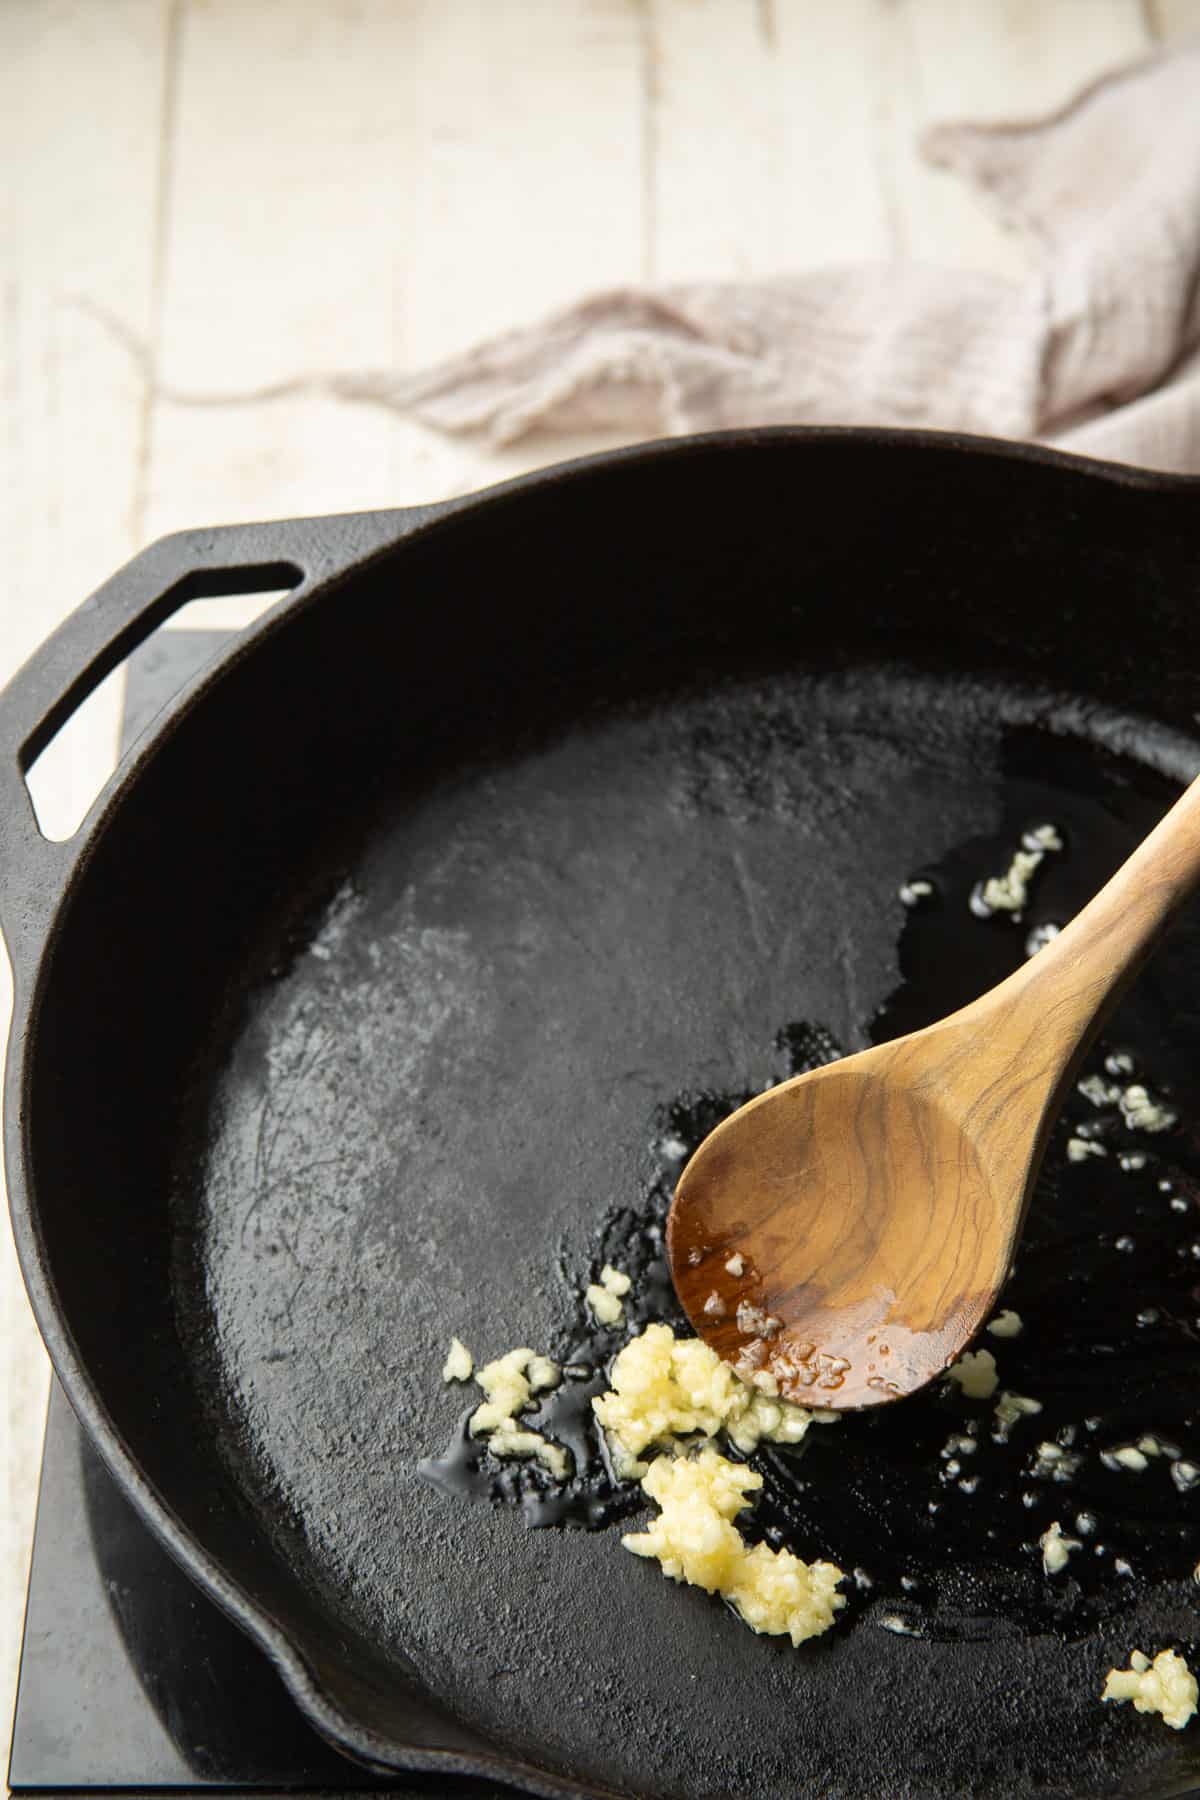 Minced garlic cooking in olive oil in a skillet.